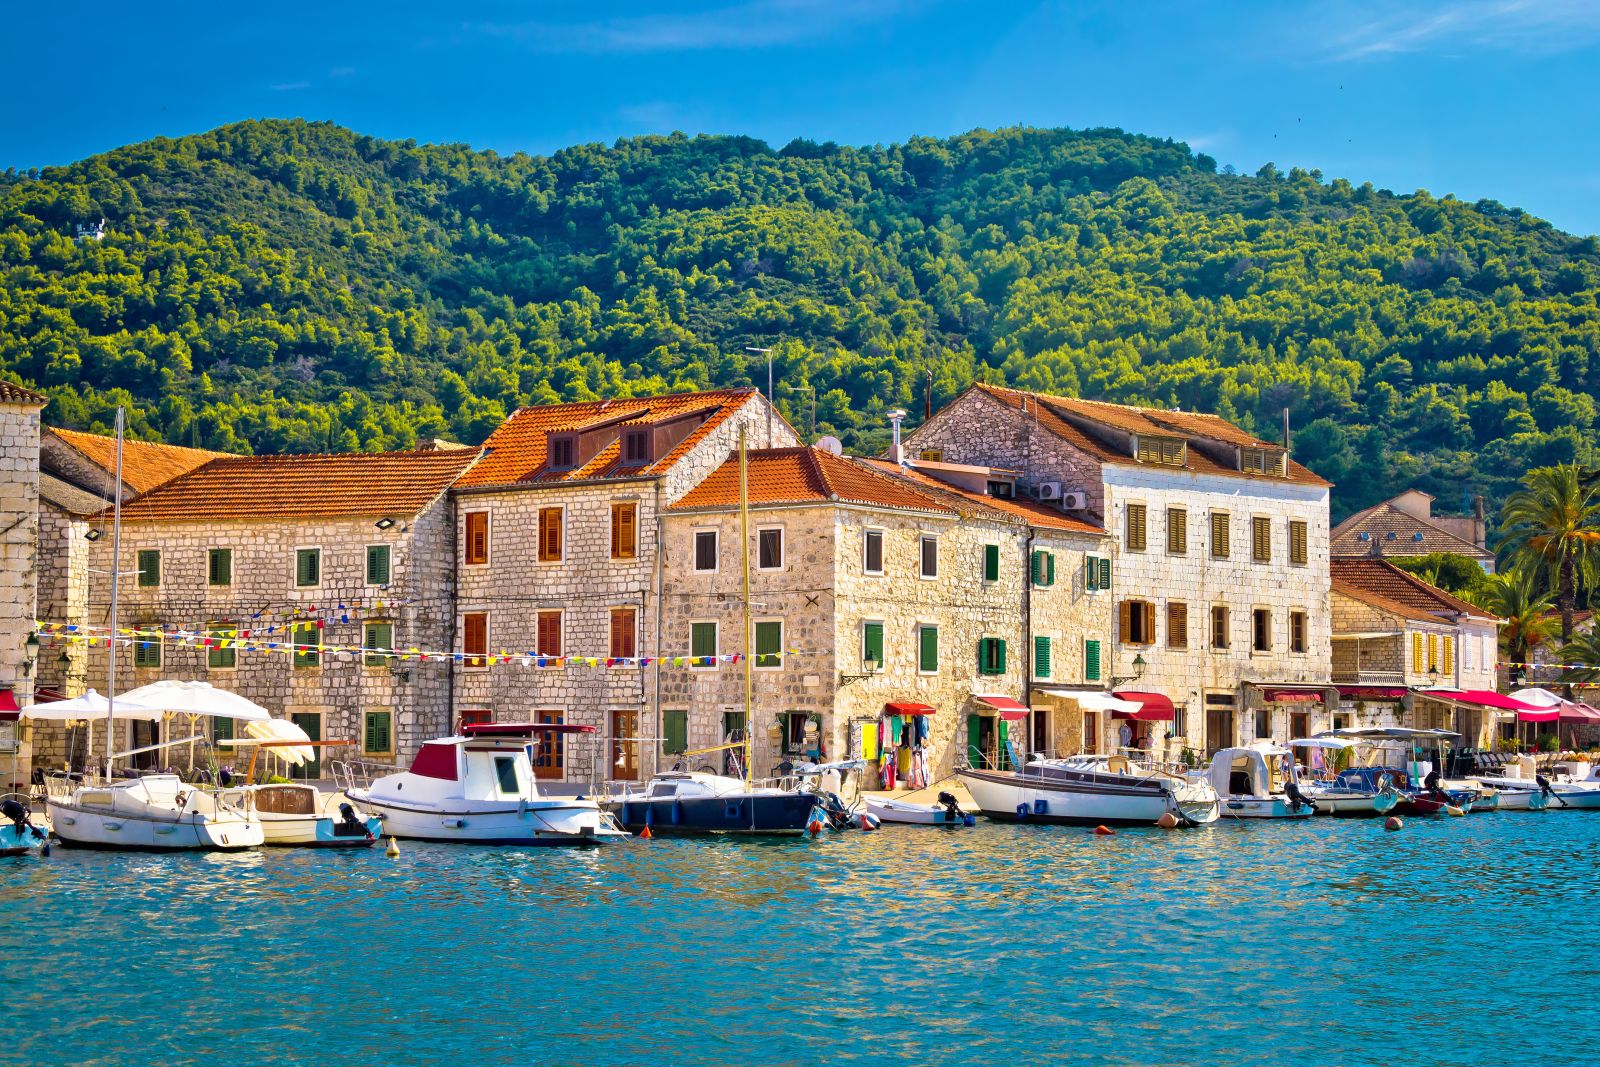 The waterfront of Hvar Croatia with  forested hills in the background